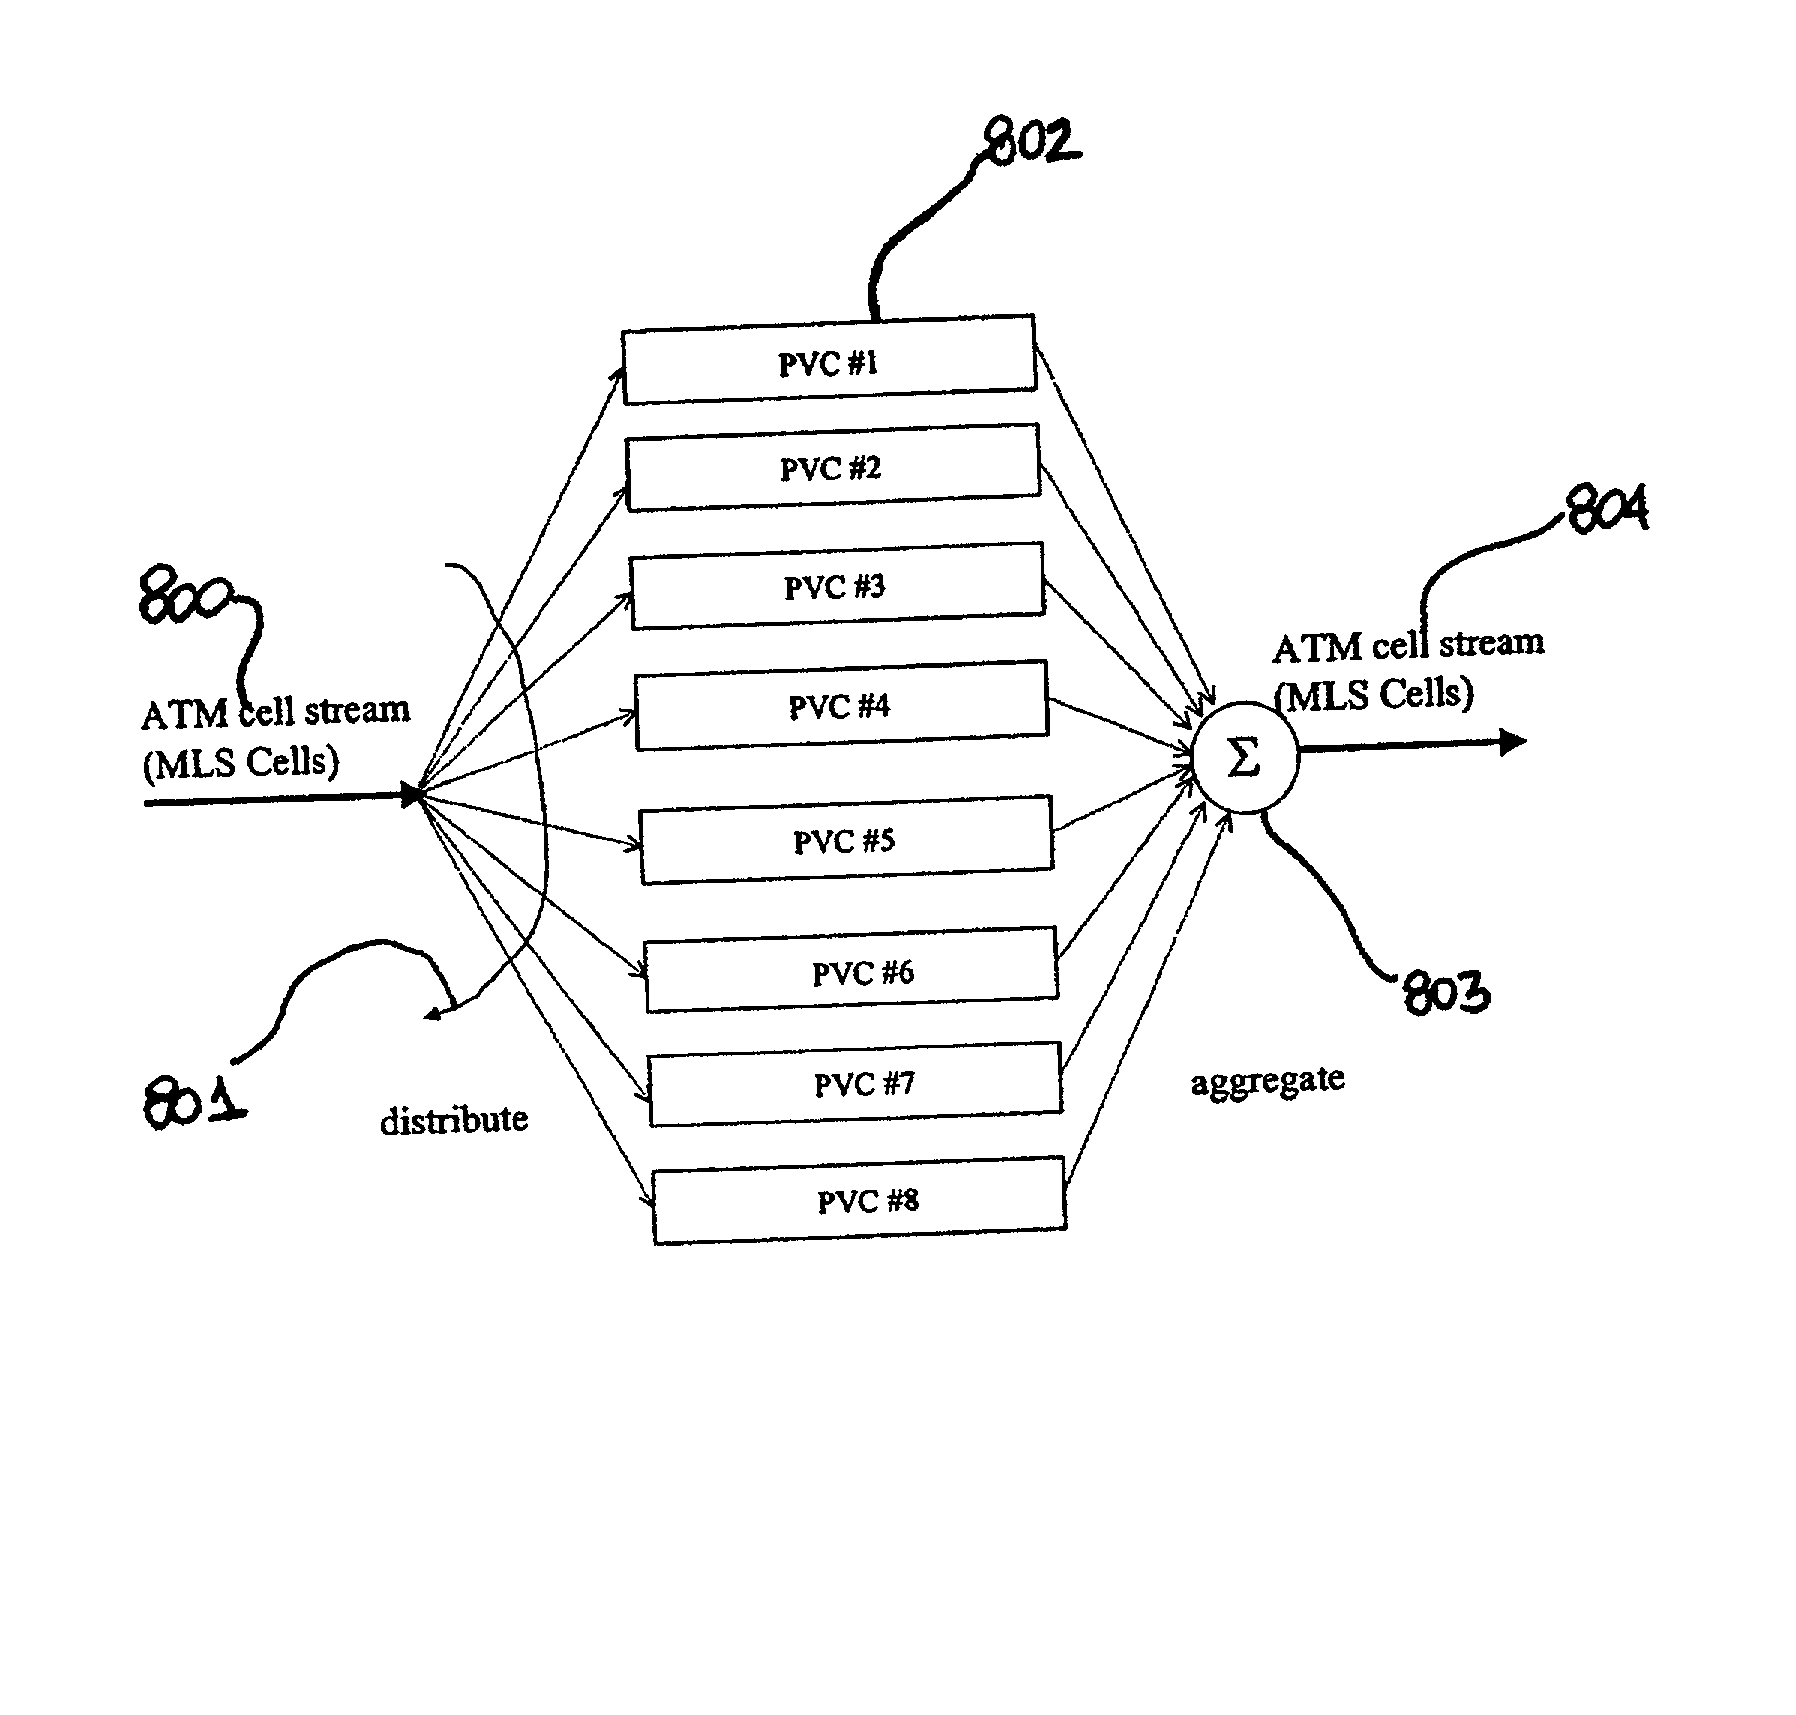 Multi-link segmentation and reassembly for bonding multiple pvc's in an inverse multiplexing arrangement